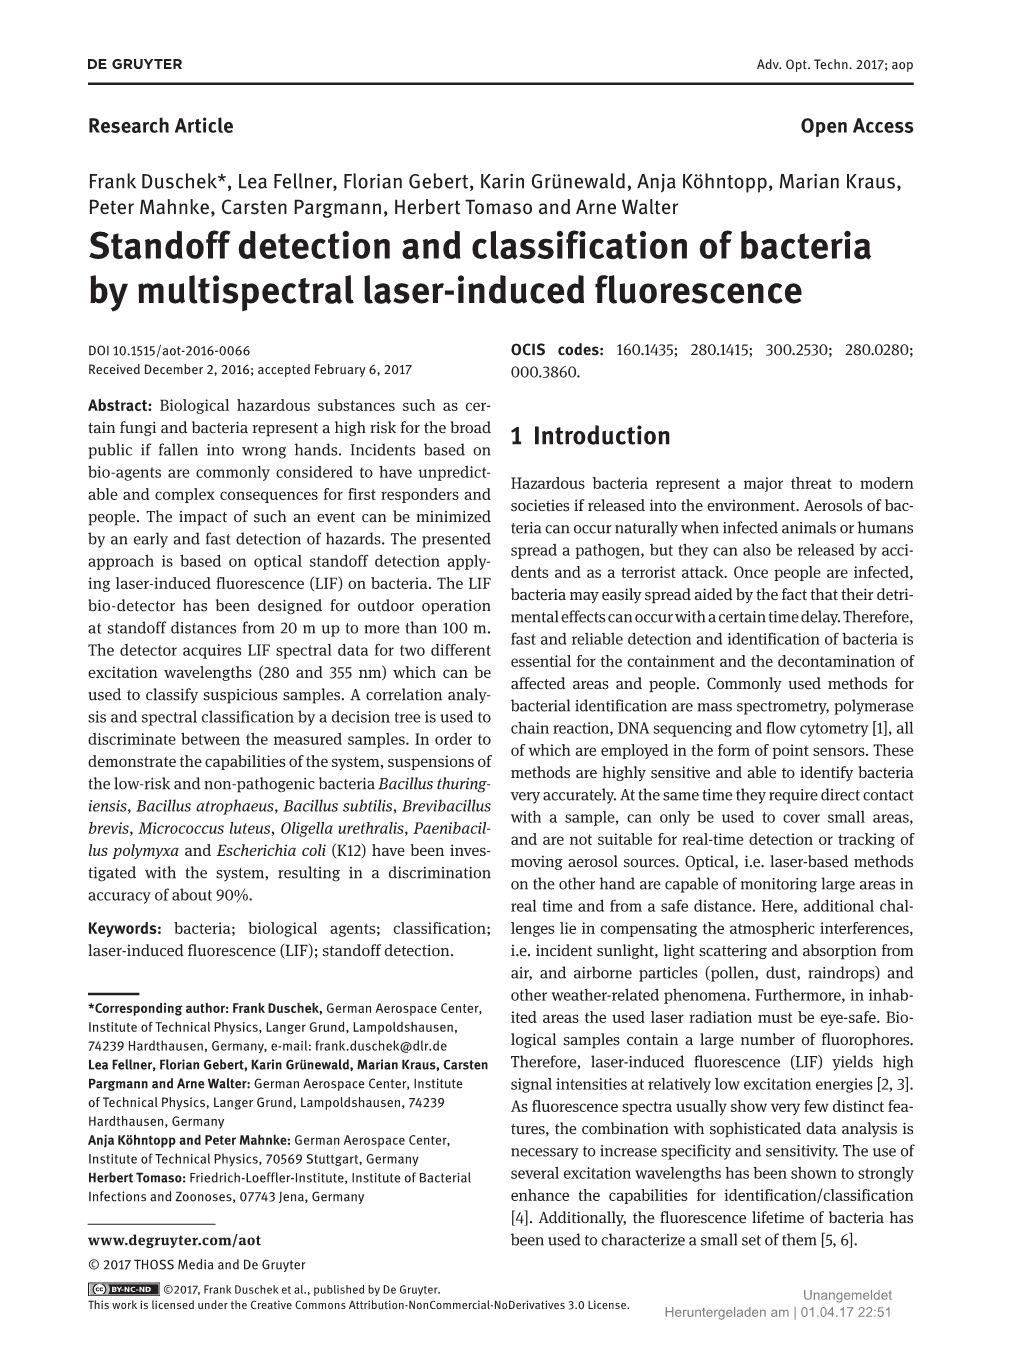 Standoff Detection and Classification of Bacteria by Multispectral Laser-Induced Fluorescence